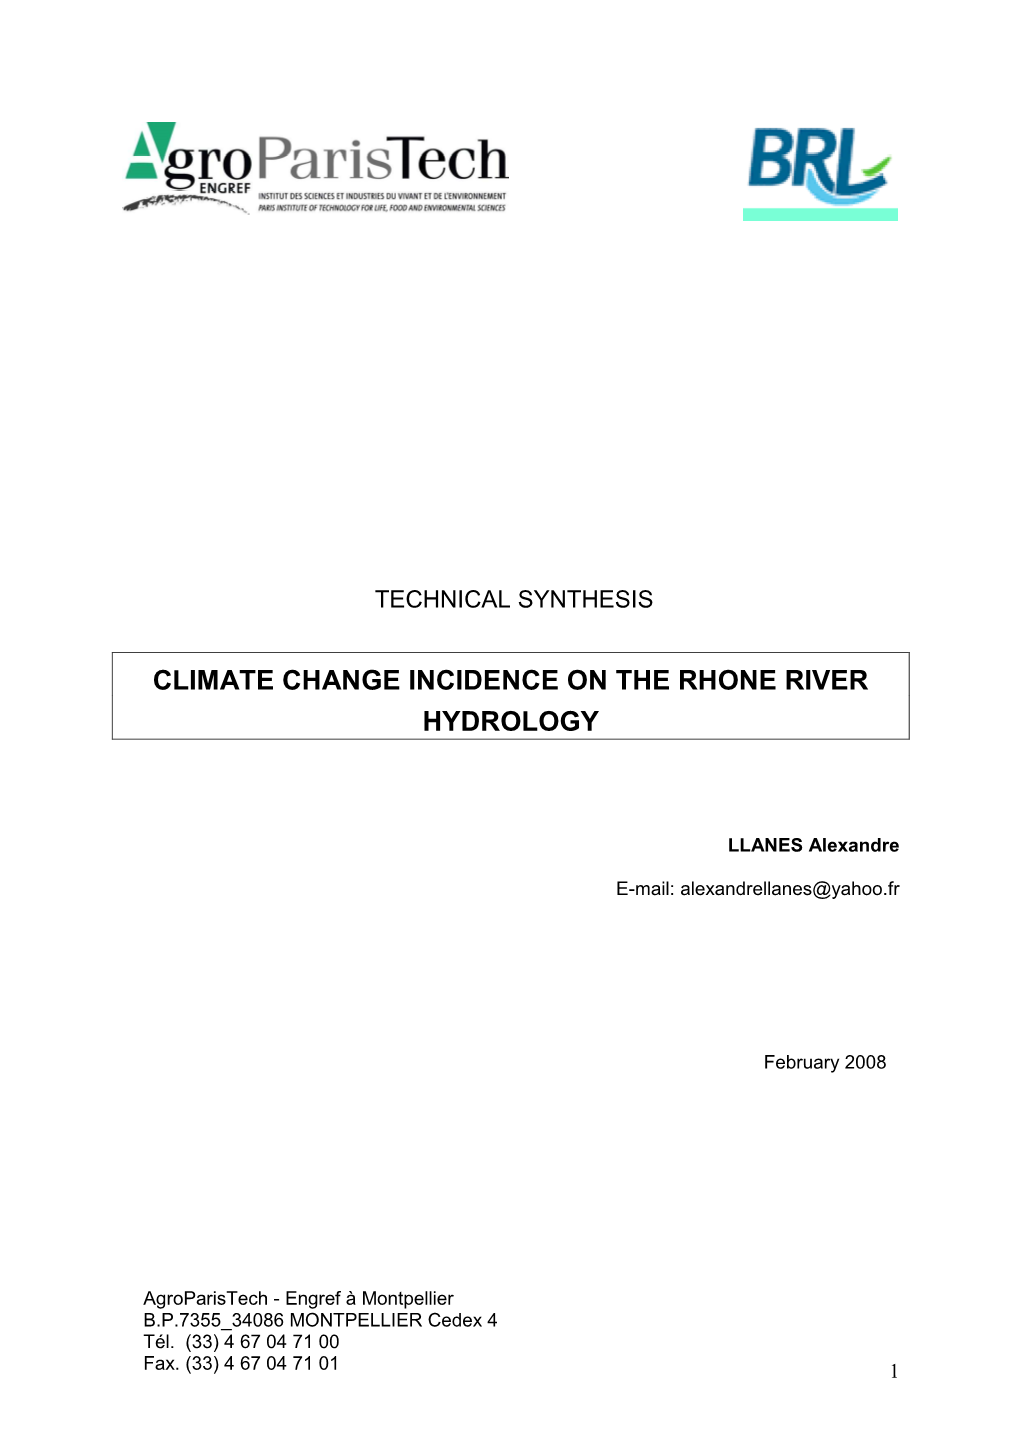 Climate Change Incidence on the Rhone River Hydrology